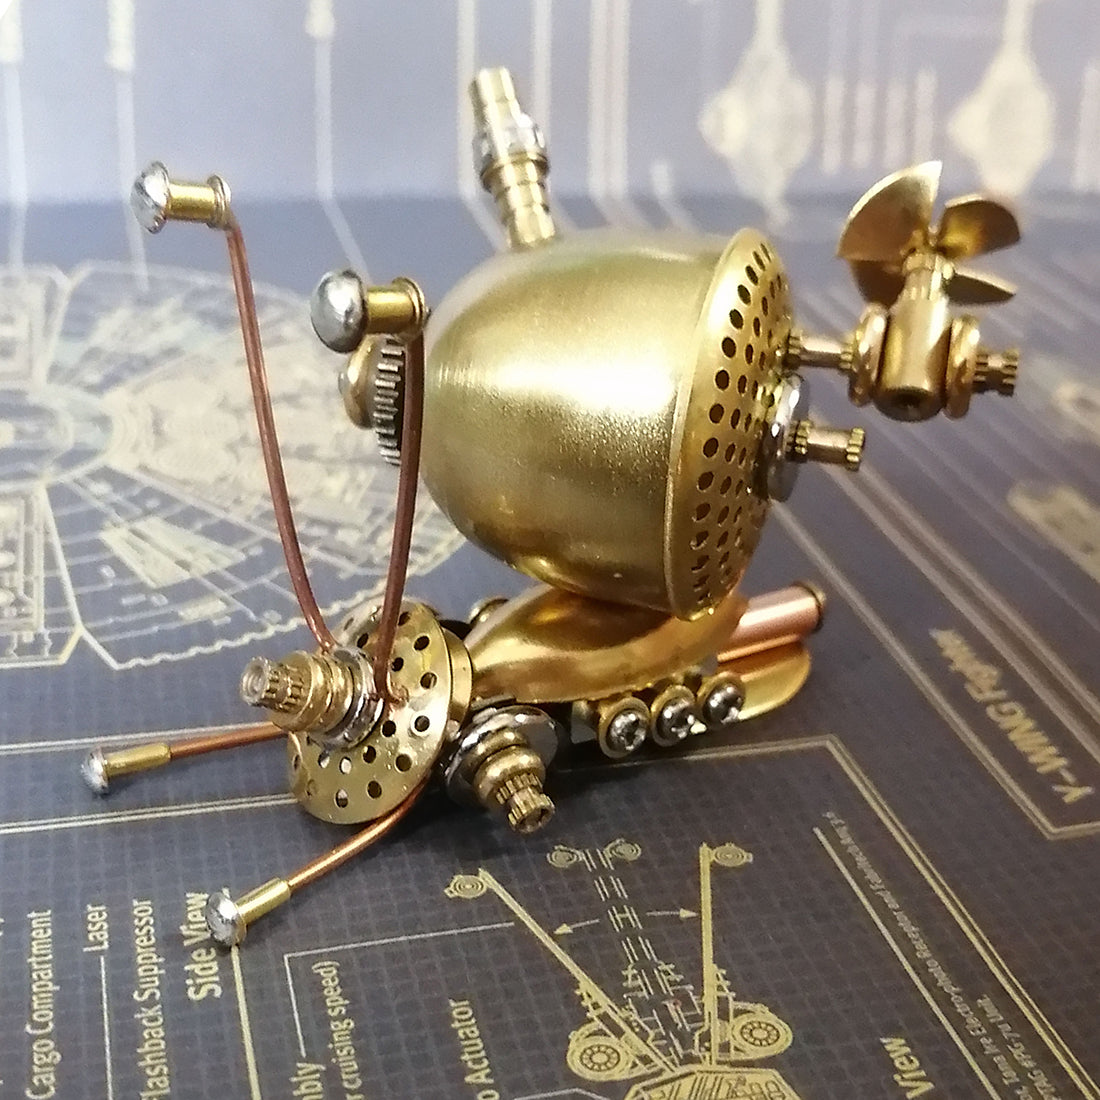 Mechanical Punk Style Golden Metal Model Insect Snail Puzzle Assembly Kit Creative Gift for Home Decor